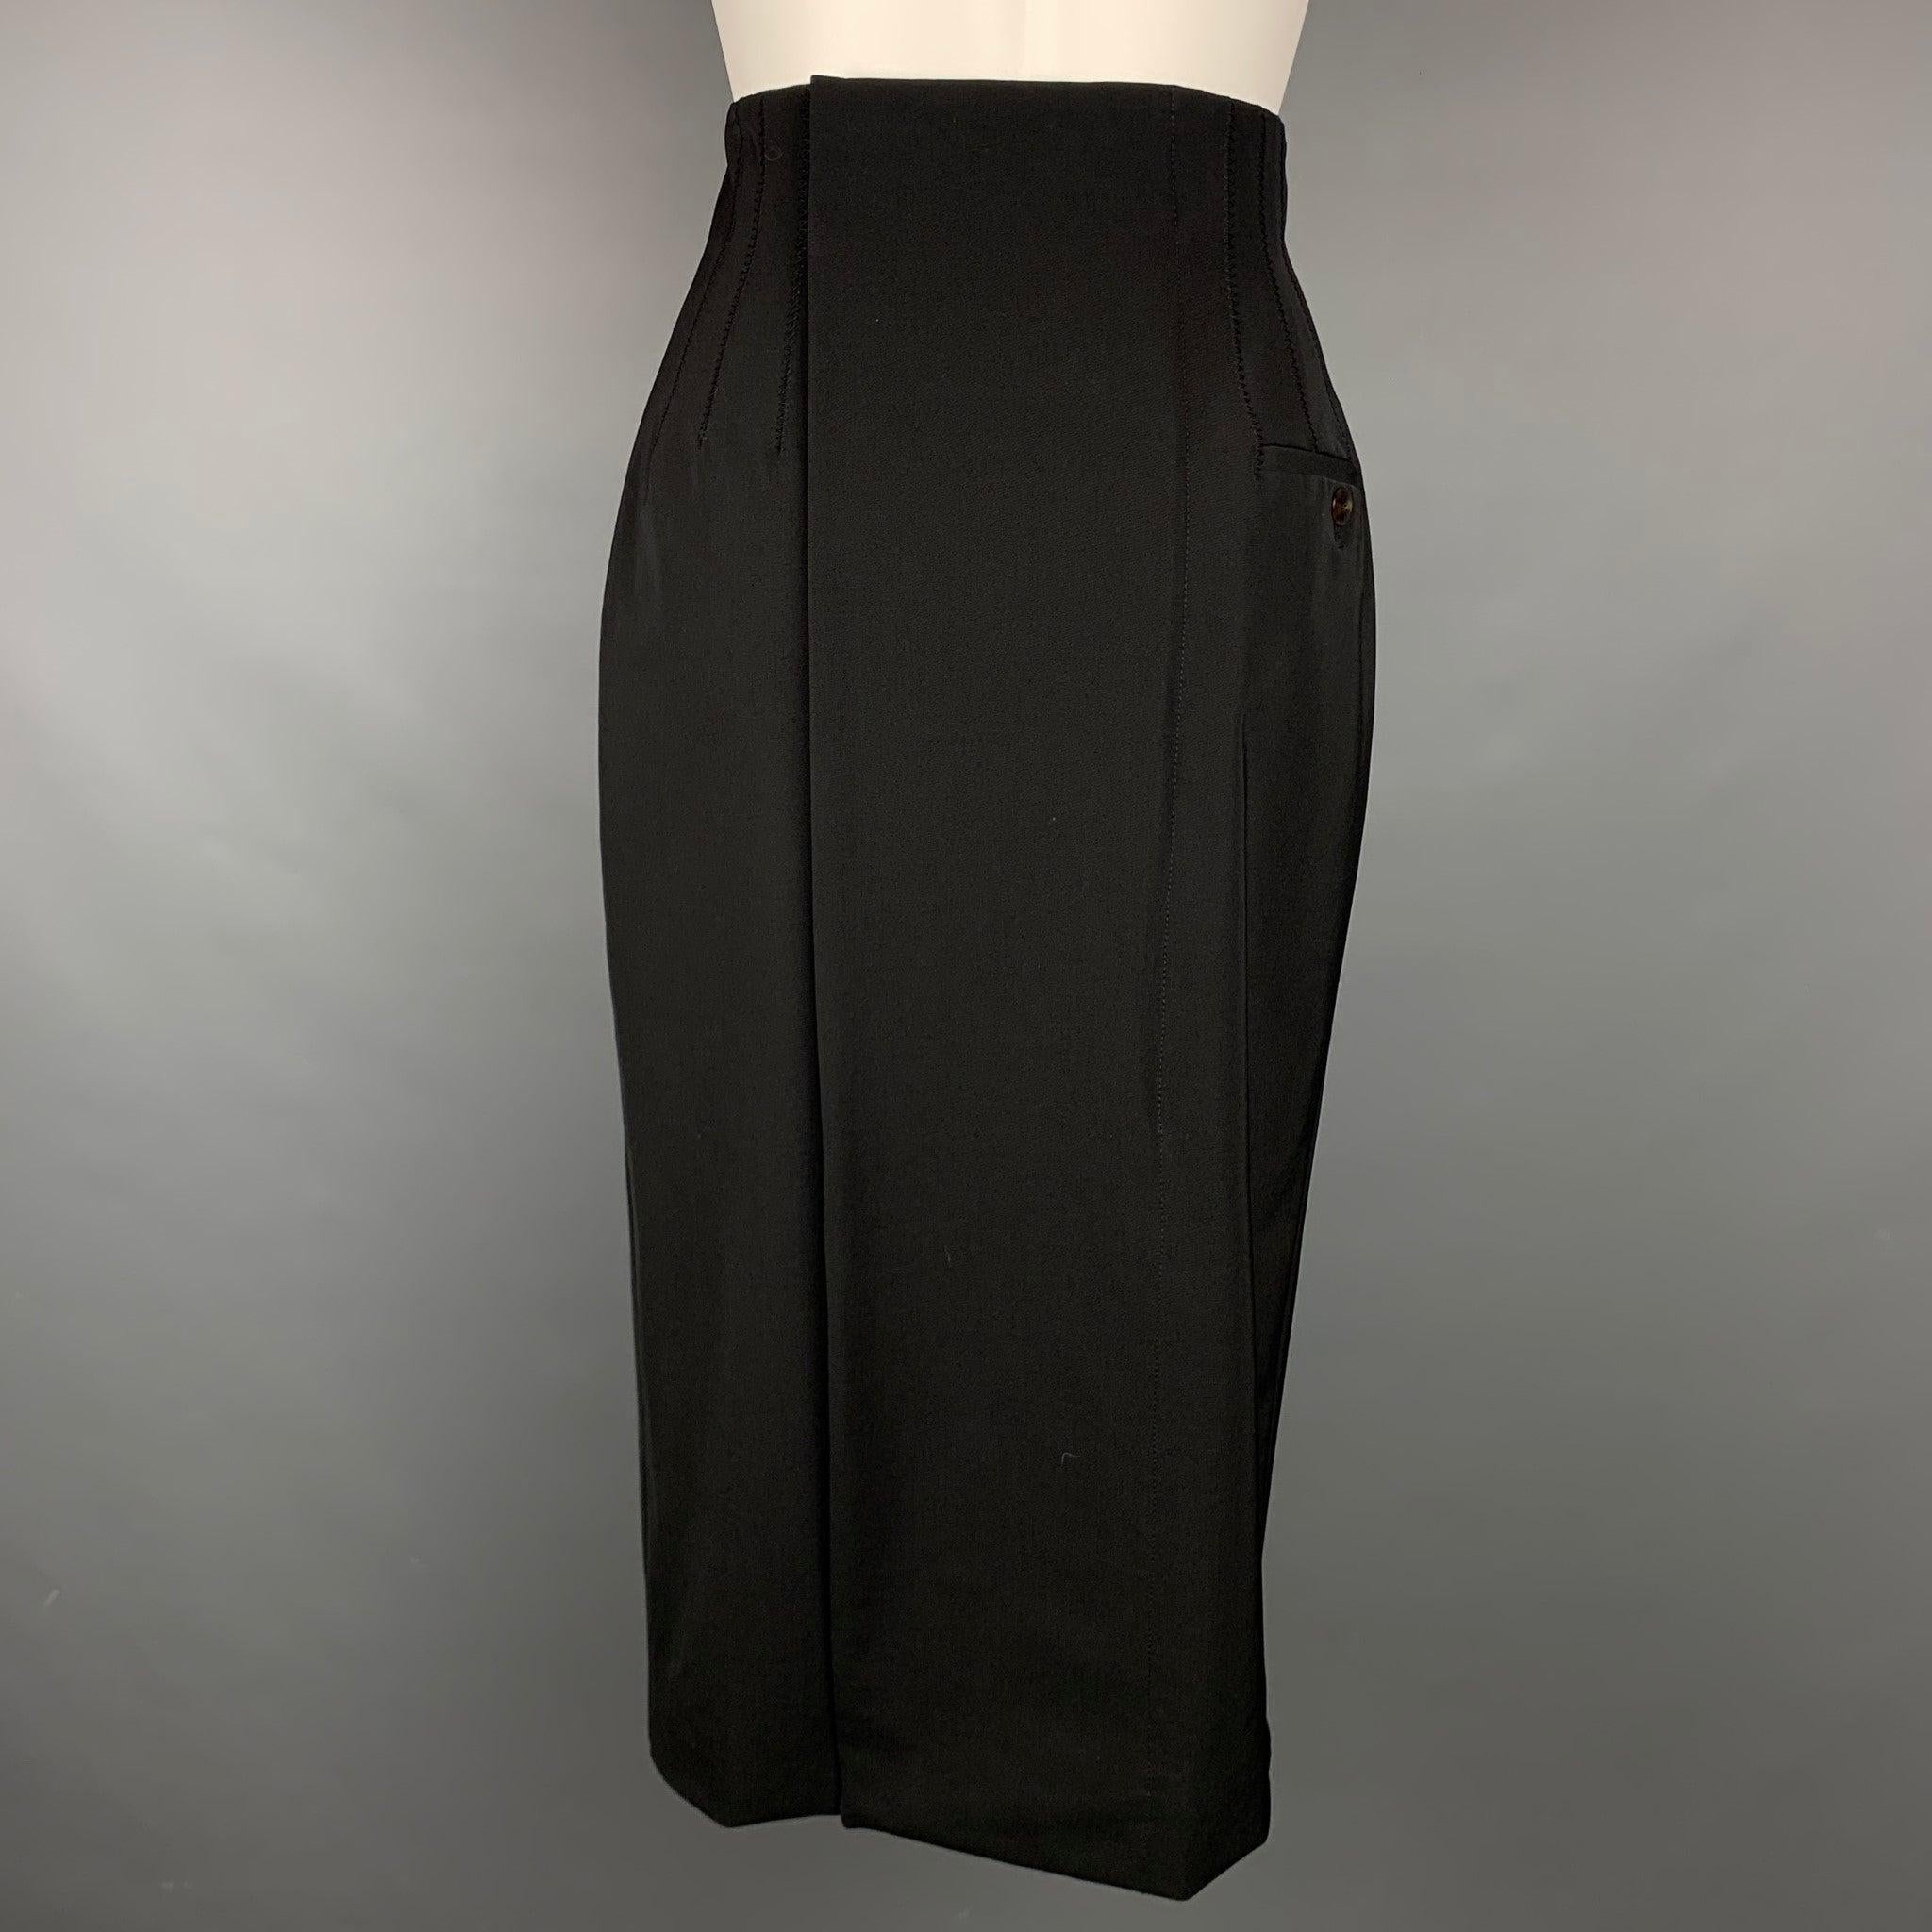 JEAN PAUL GAULTIER Reedition 1993/1994 Size 8 Wool/Polyester High Waisted Skirt In Good Condition For Sale In San Francisco, CA